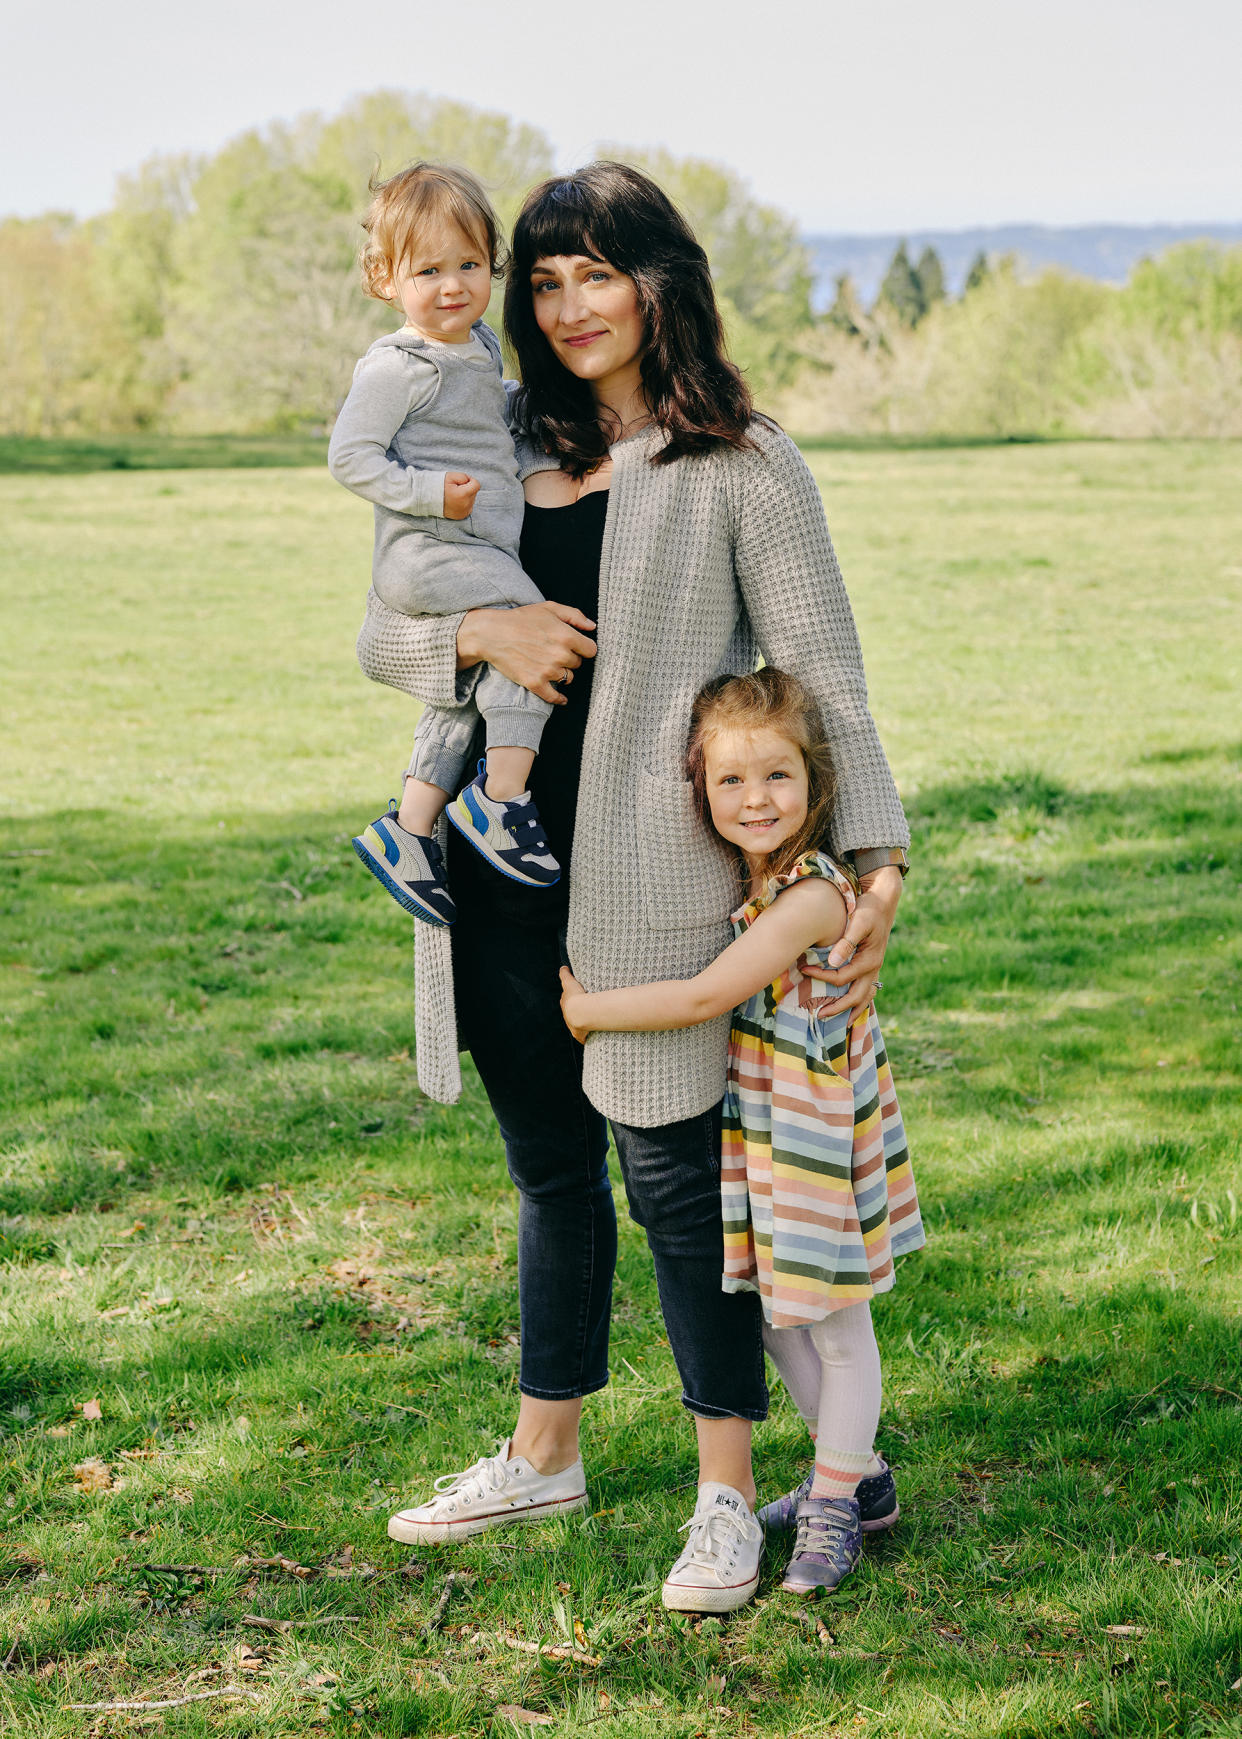 Holly Alexander, pictured with her two children. (Courtesy Elizabeth Rudge)